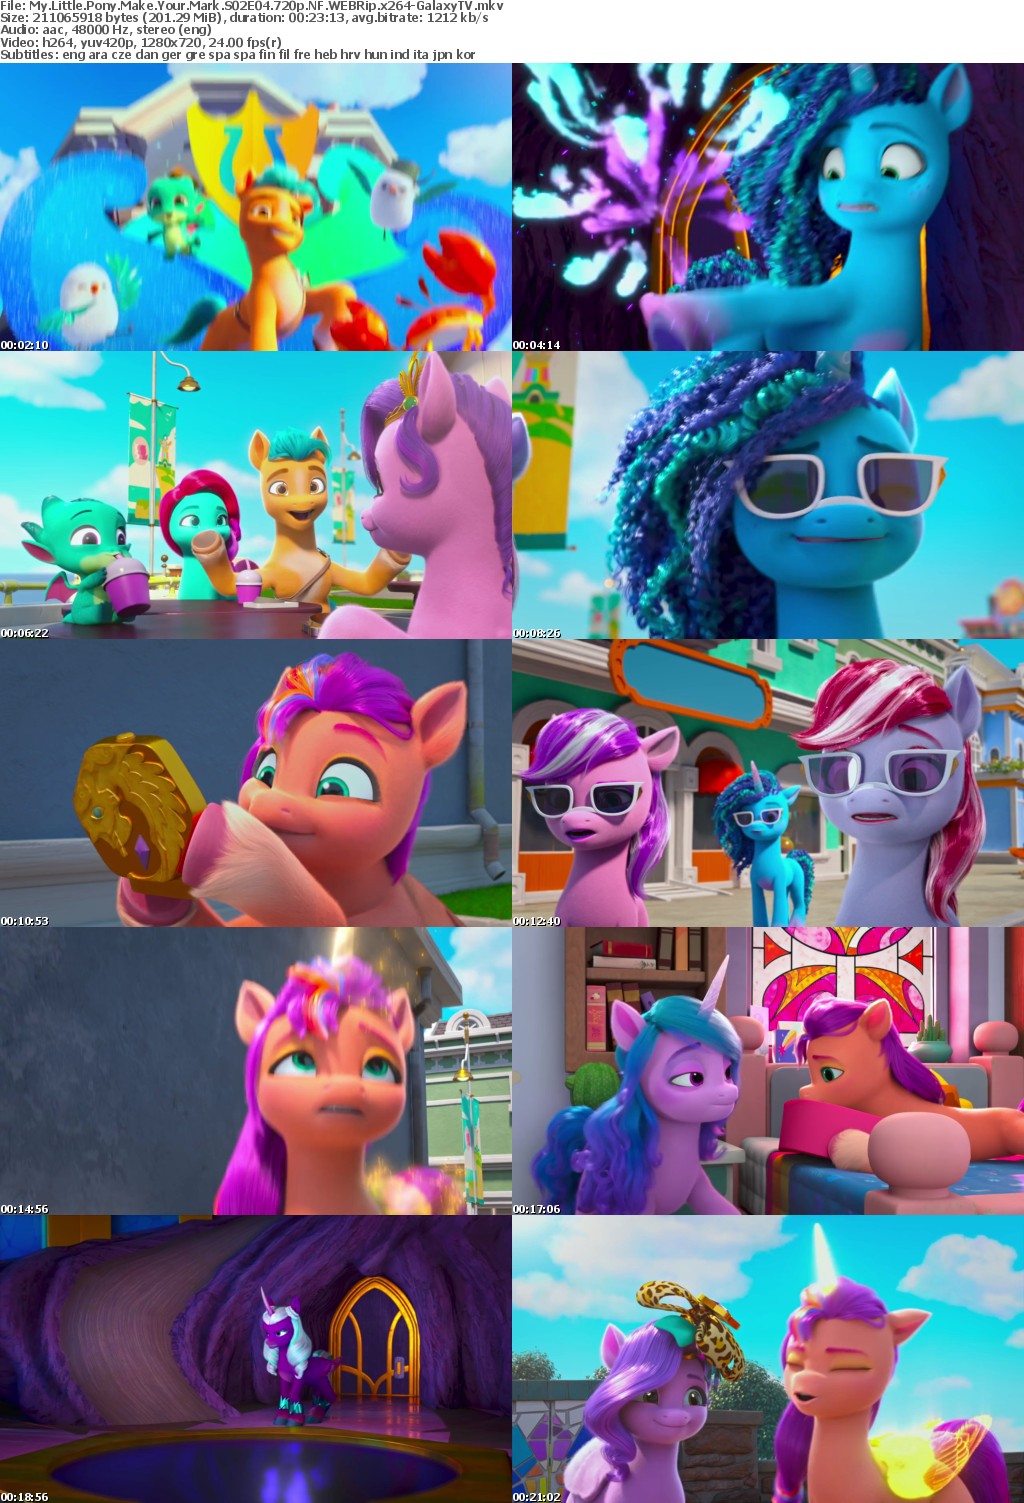 My Little Pony Make Your Mark S02 COMPLETE 720p NF WEBRip x264-GalaxyTV